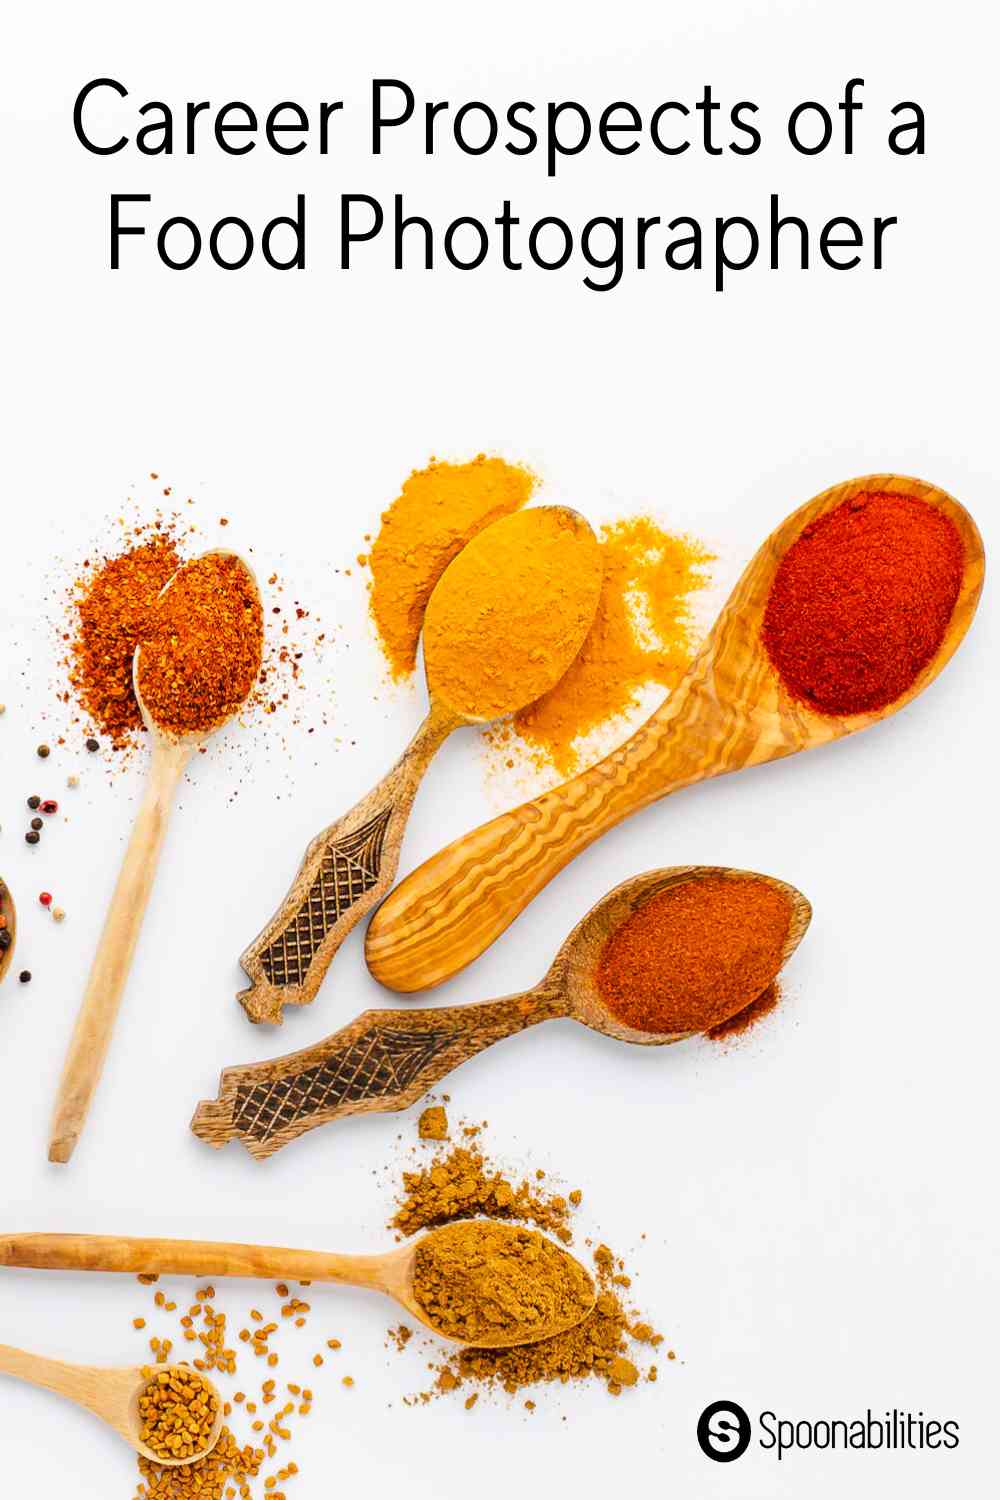 Career prospects of a food photographer title on colored salts on spoons